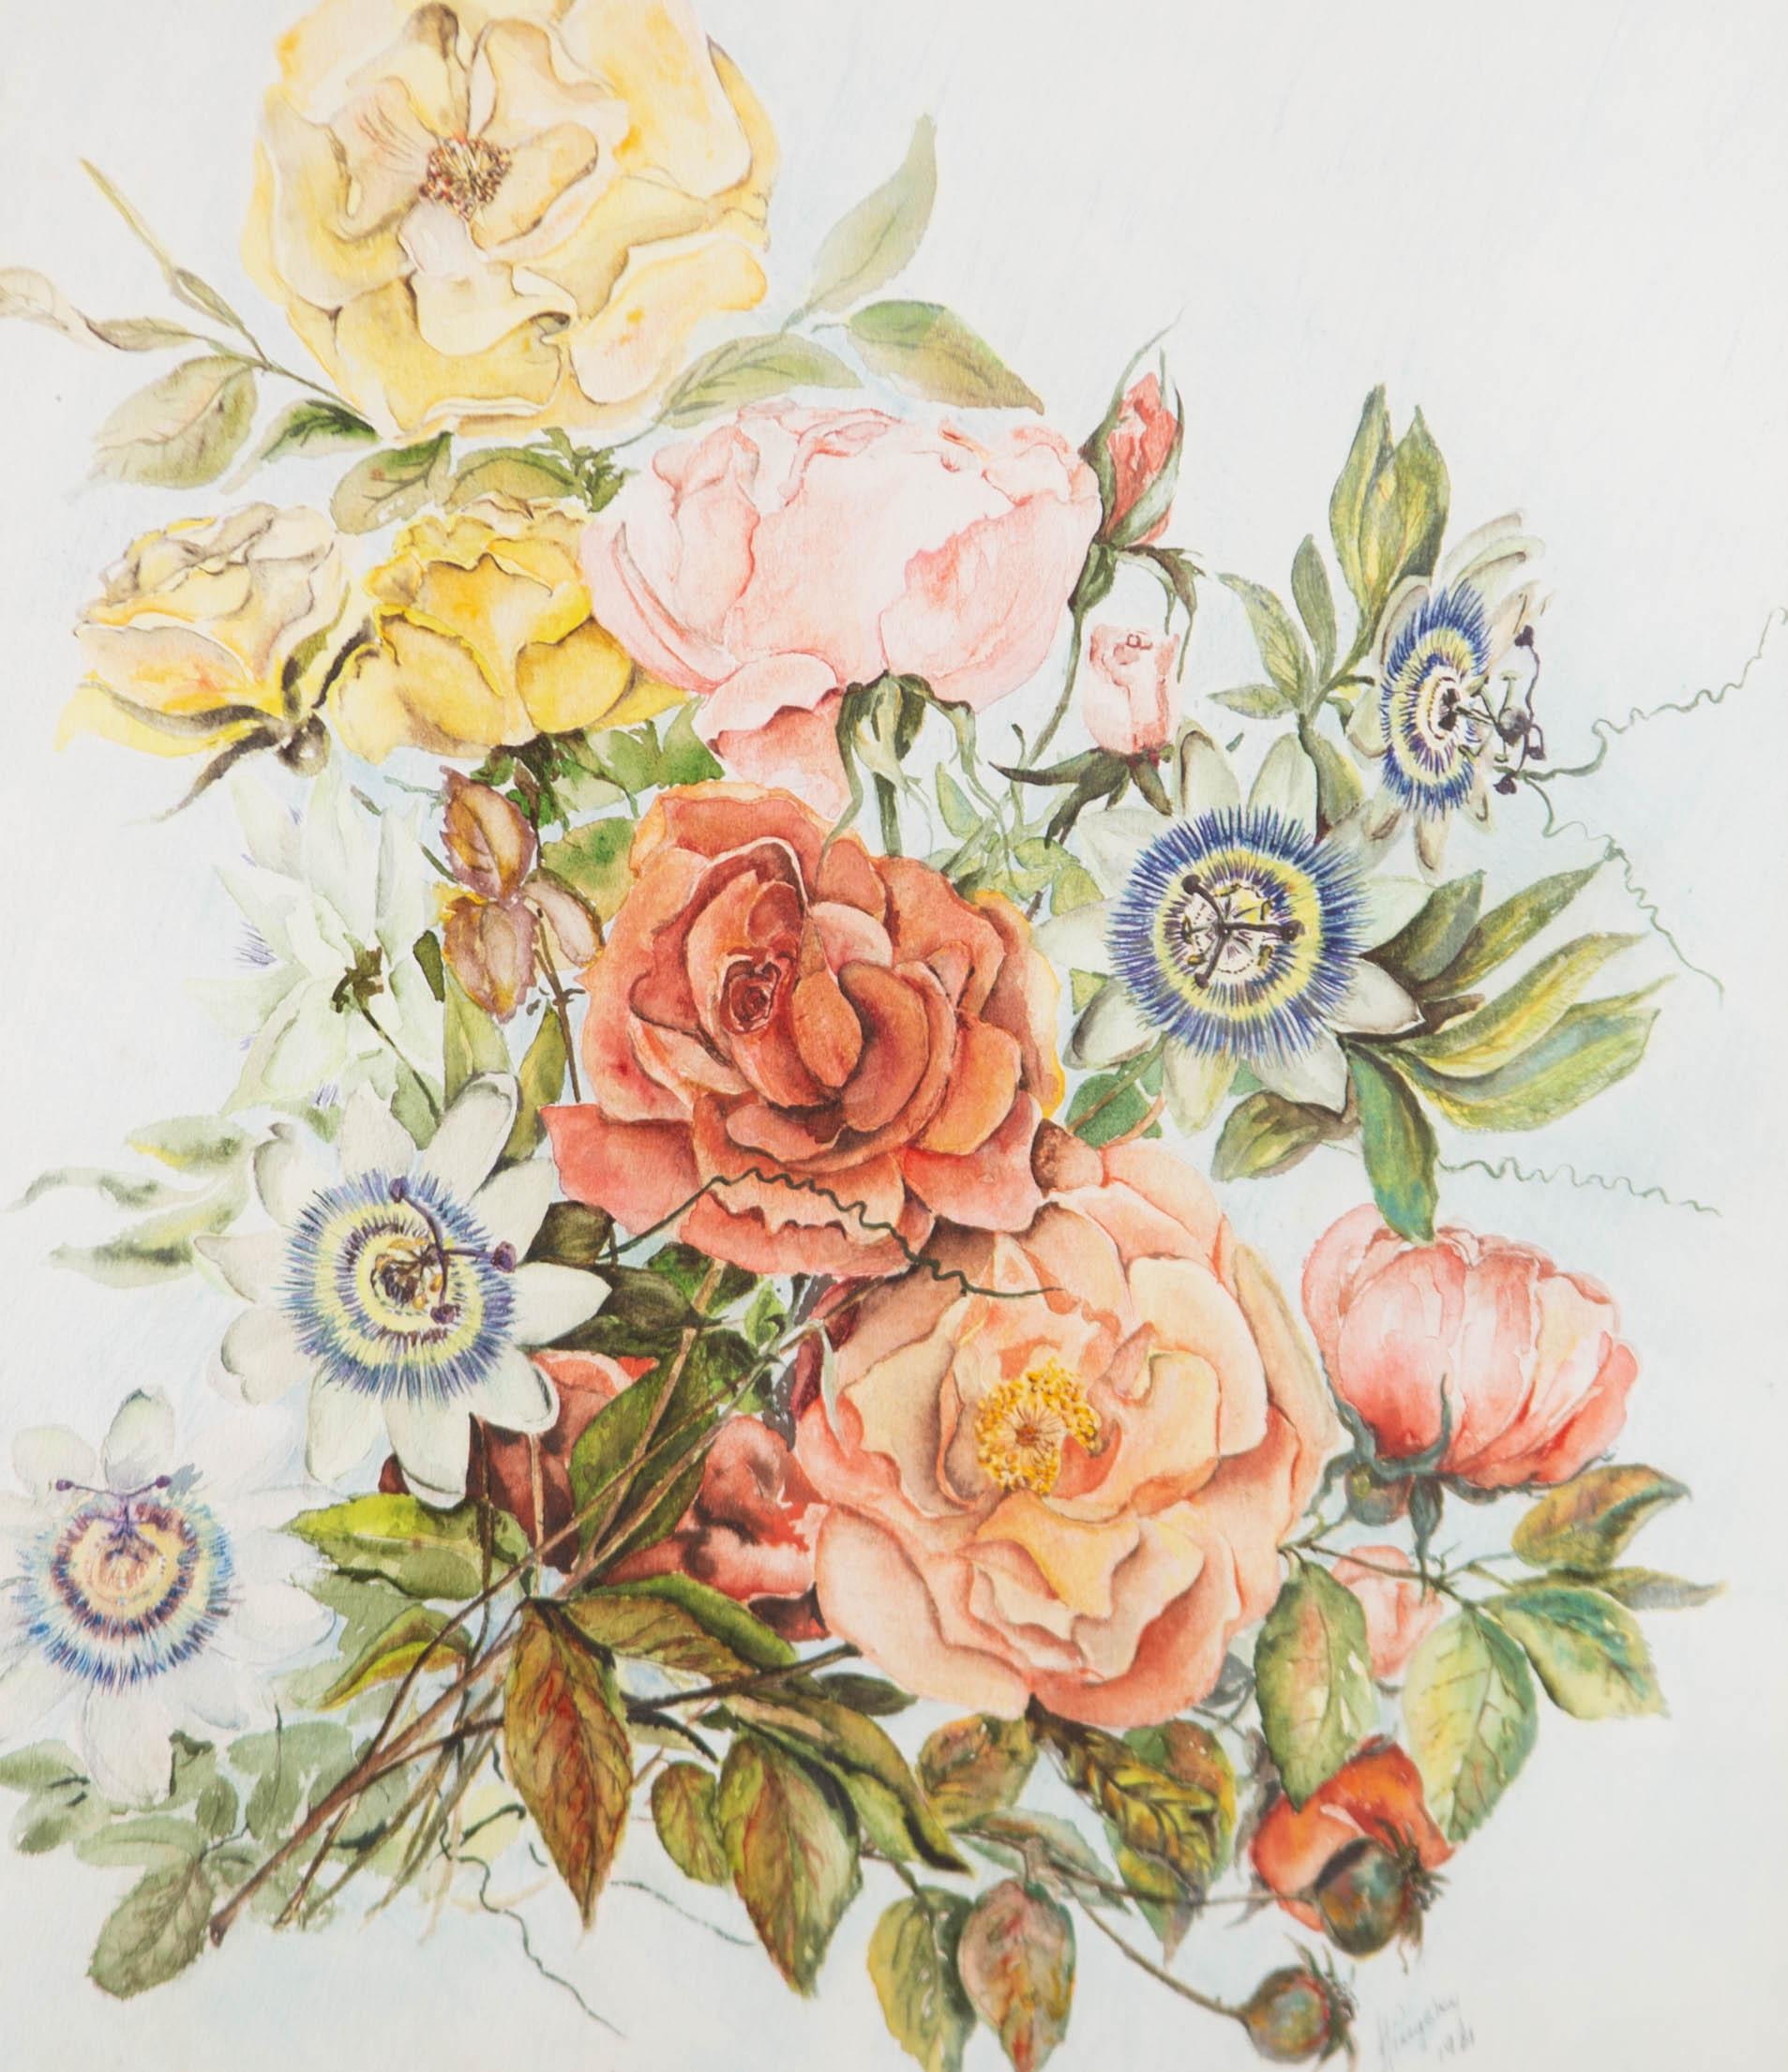 H. Pugsley - 1981 Watercolour, Flowers - Art by Unknown